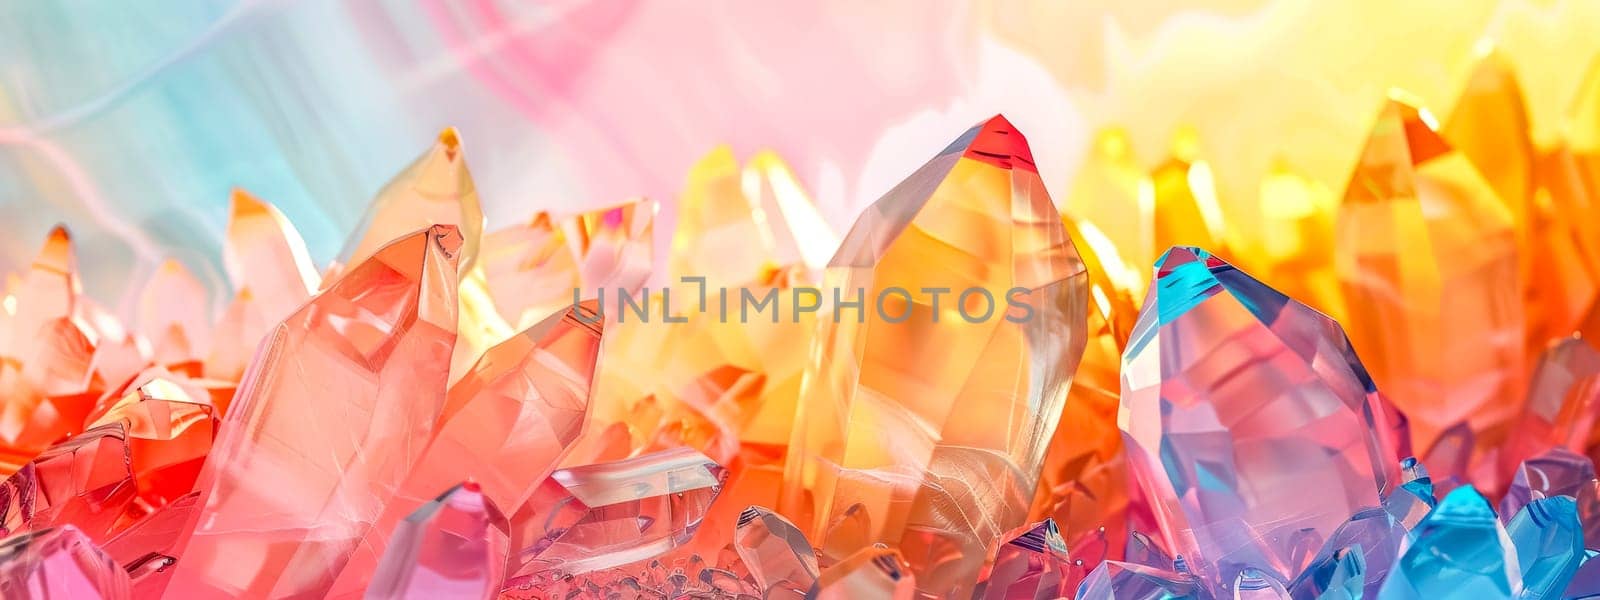 Vibrant and colorful rainbow crystal landscape panorama with prismatic and translucent formations. Creating a magical and fantasy-like abstract background of gemstones and luxurious gem textures